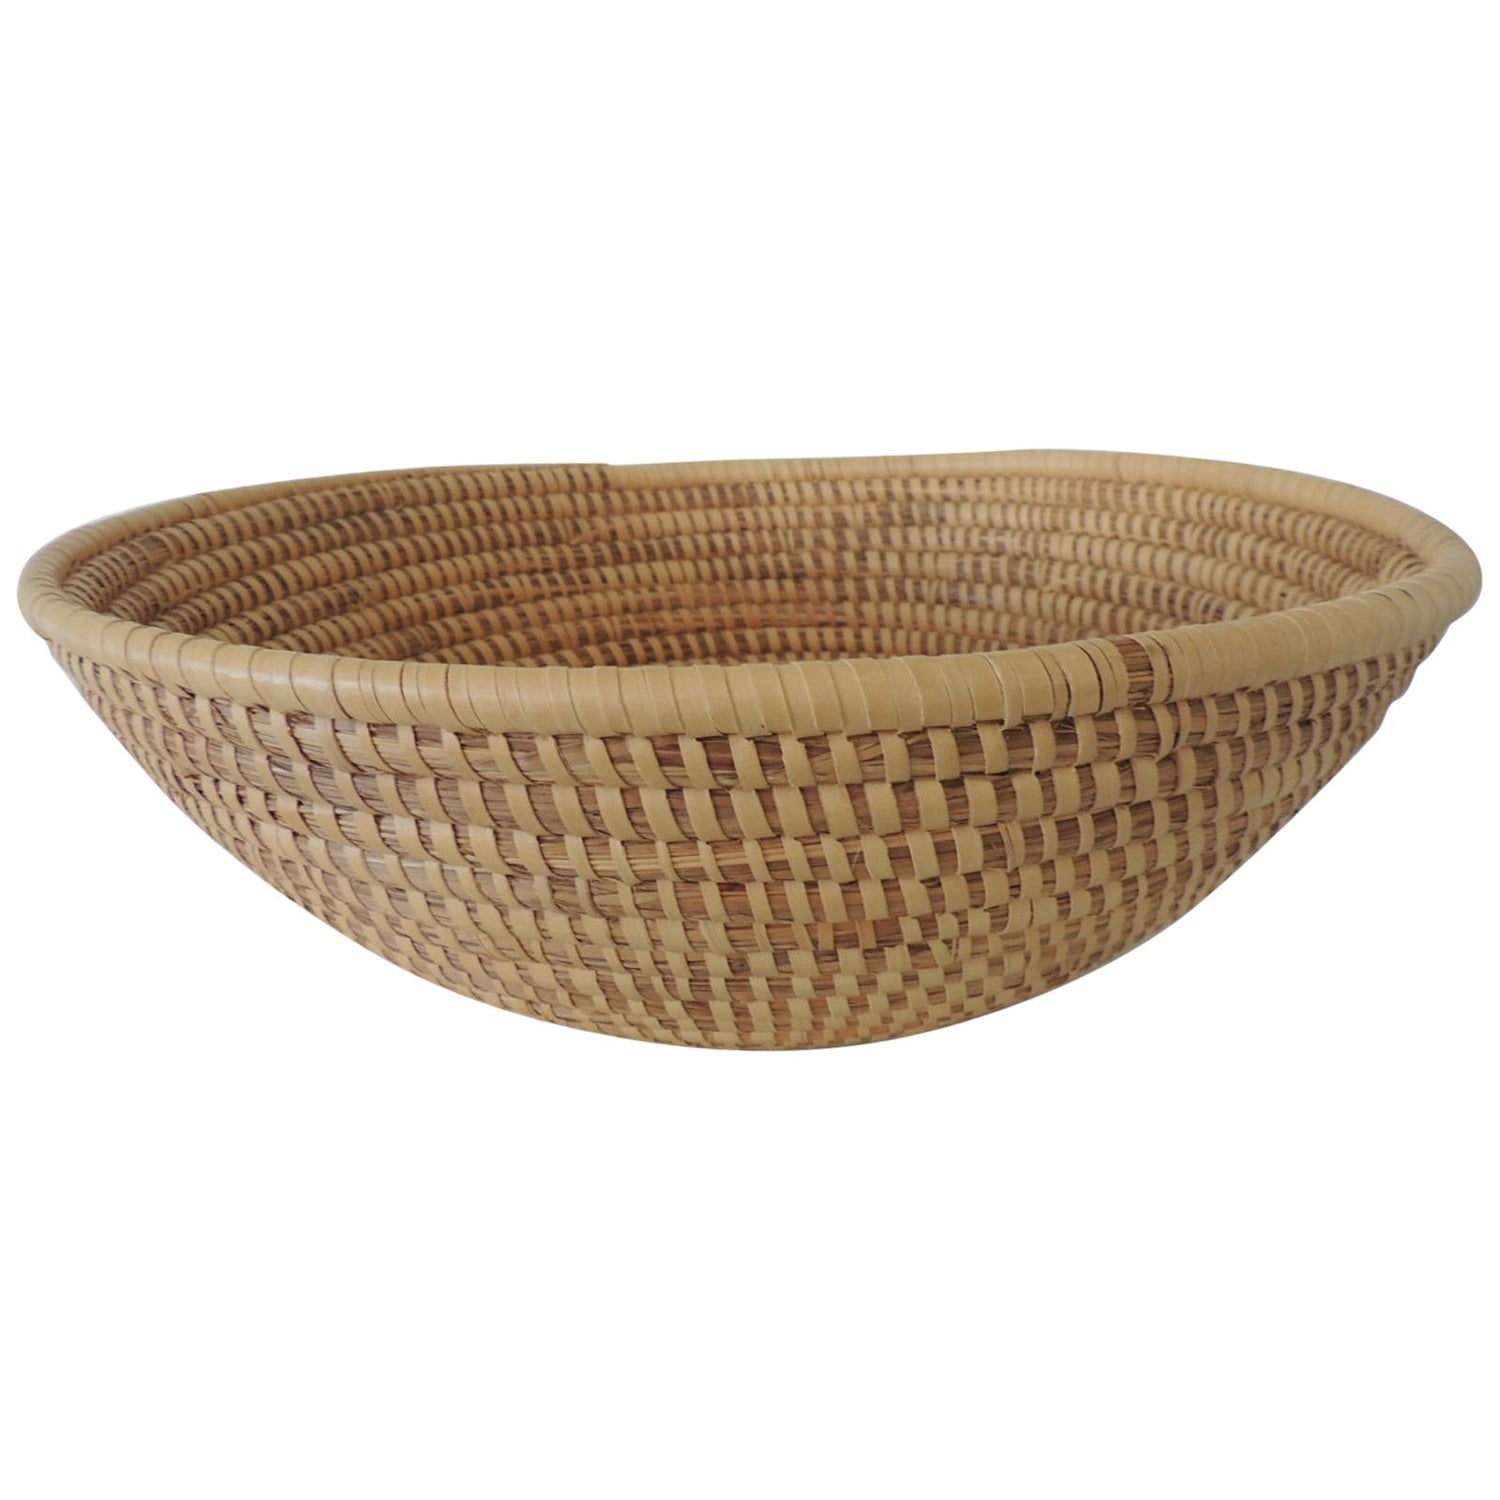 Large Round Woven Seagrass Decorative, Large Round Woven Basket